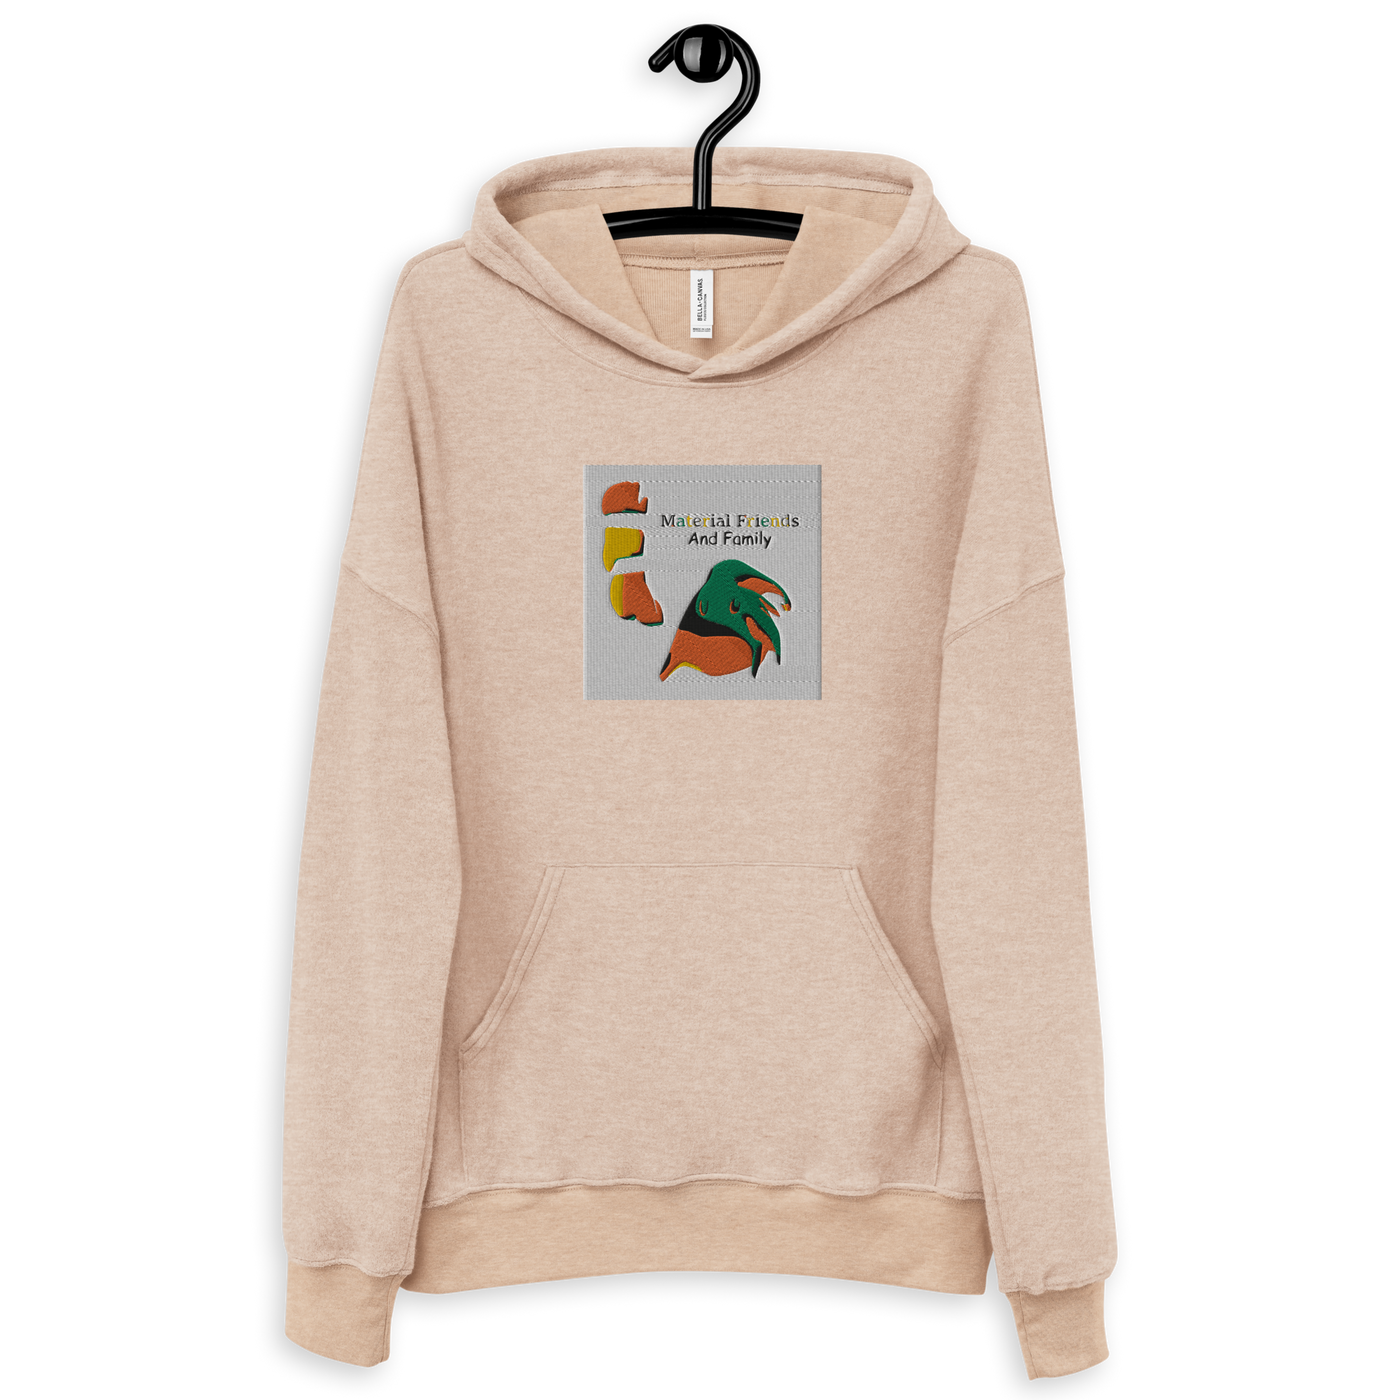 MATERIAL FRIENDS AND FAMILY HOODIE #3